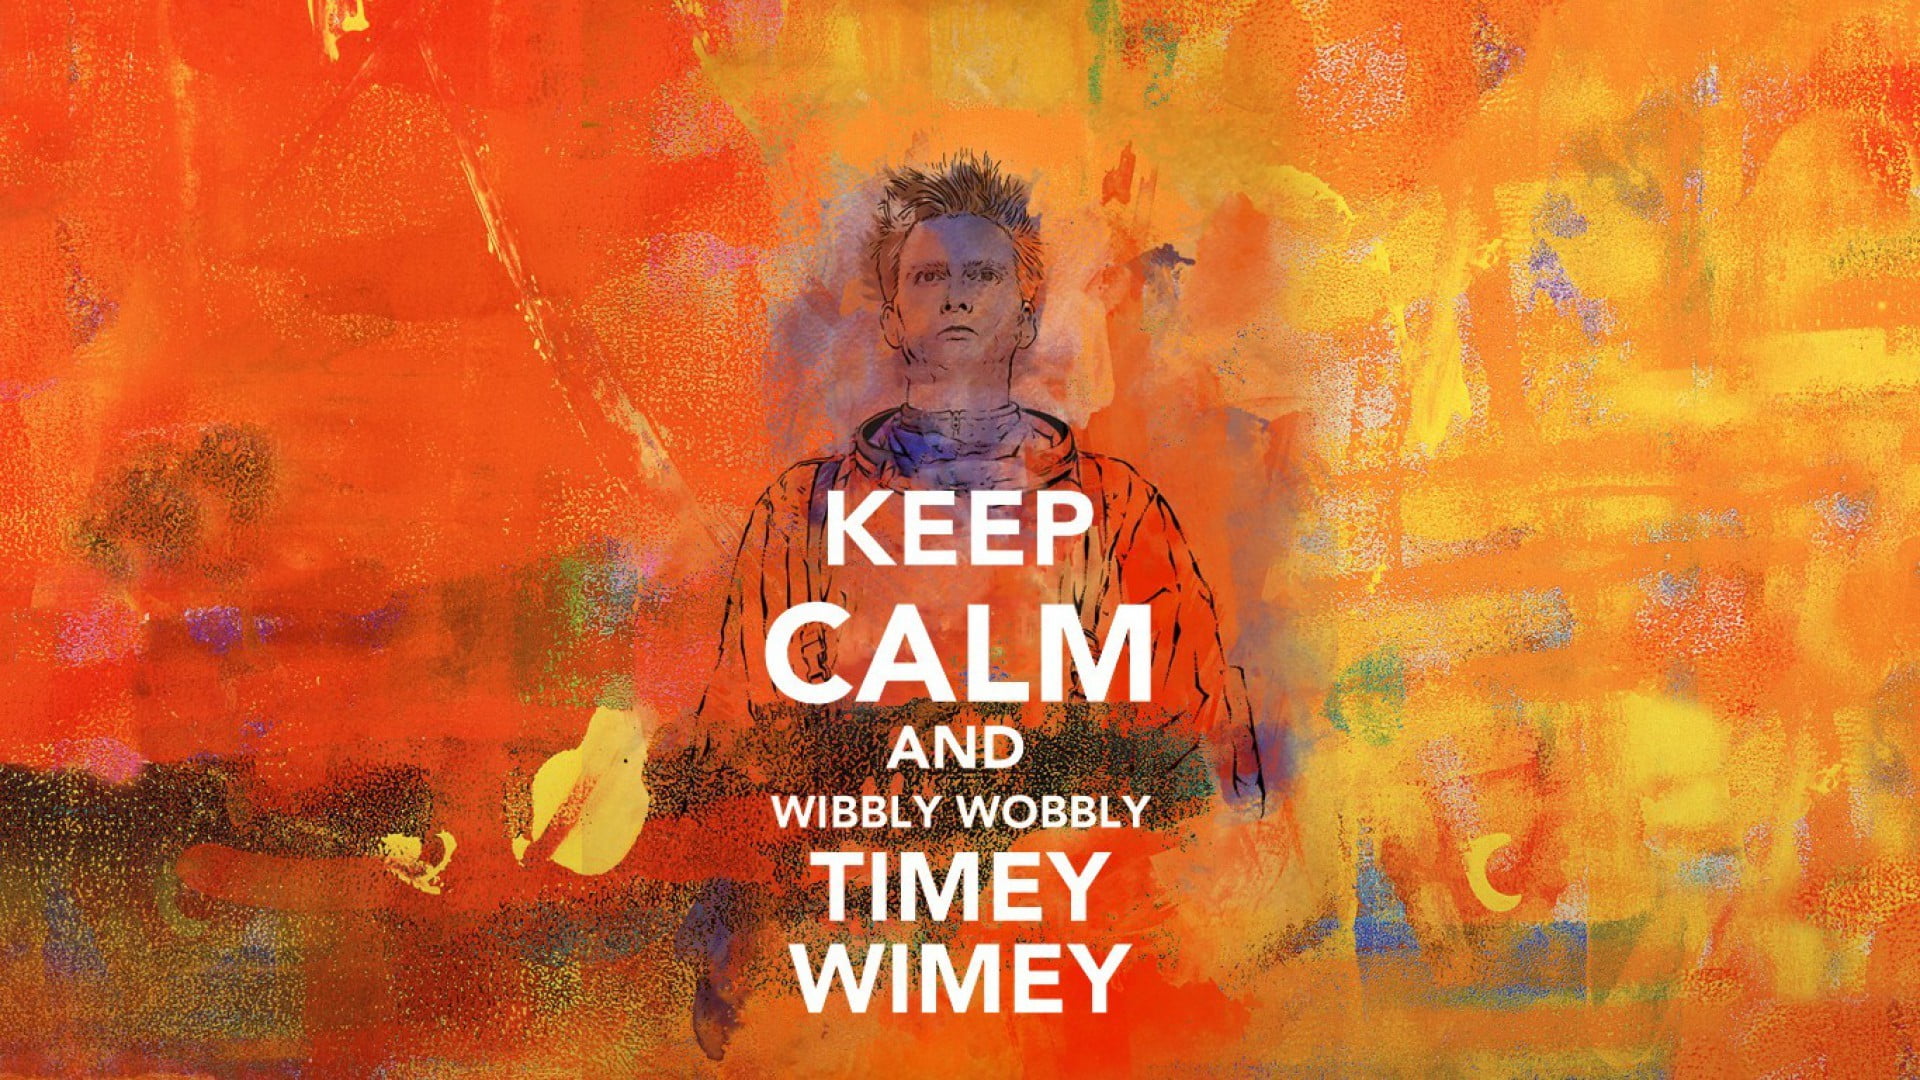 Keep Calm and Wibbly Wobbly Timey Wimey wallpaper, Doctor Who, The Doctor, David Tennant, Tenth Doctor